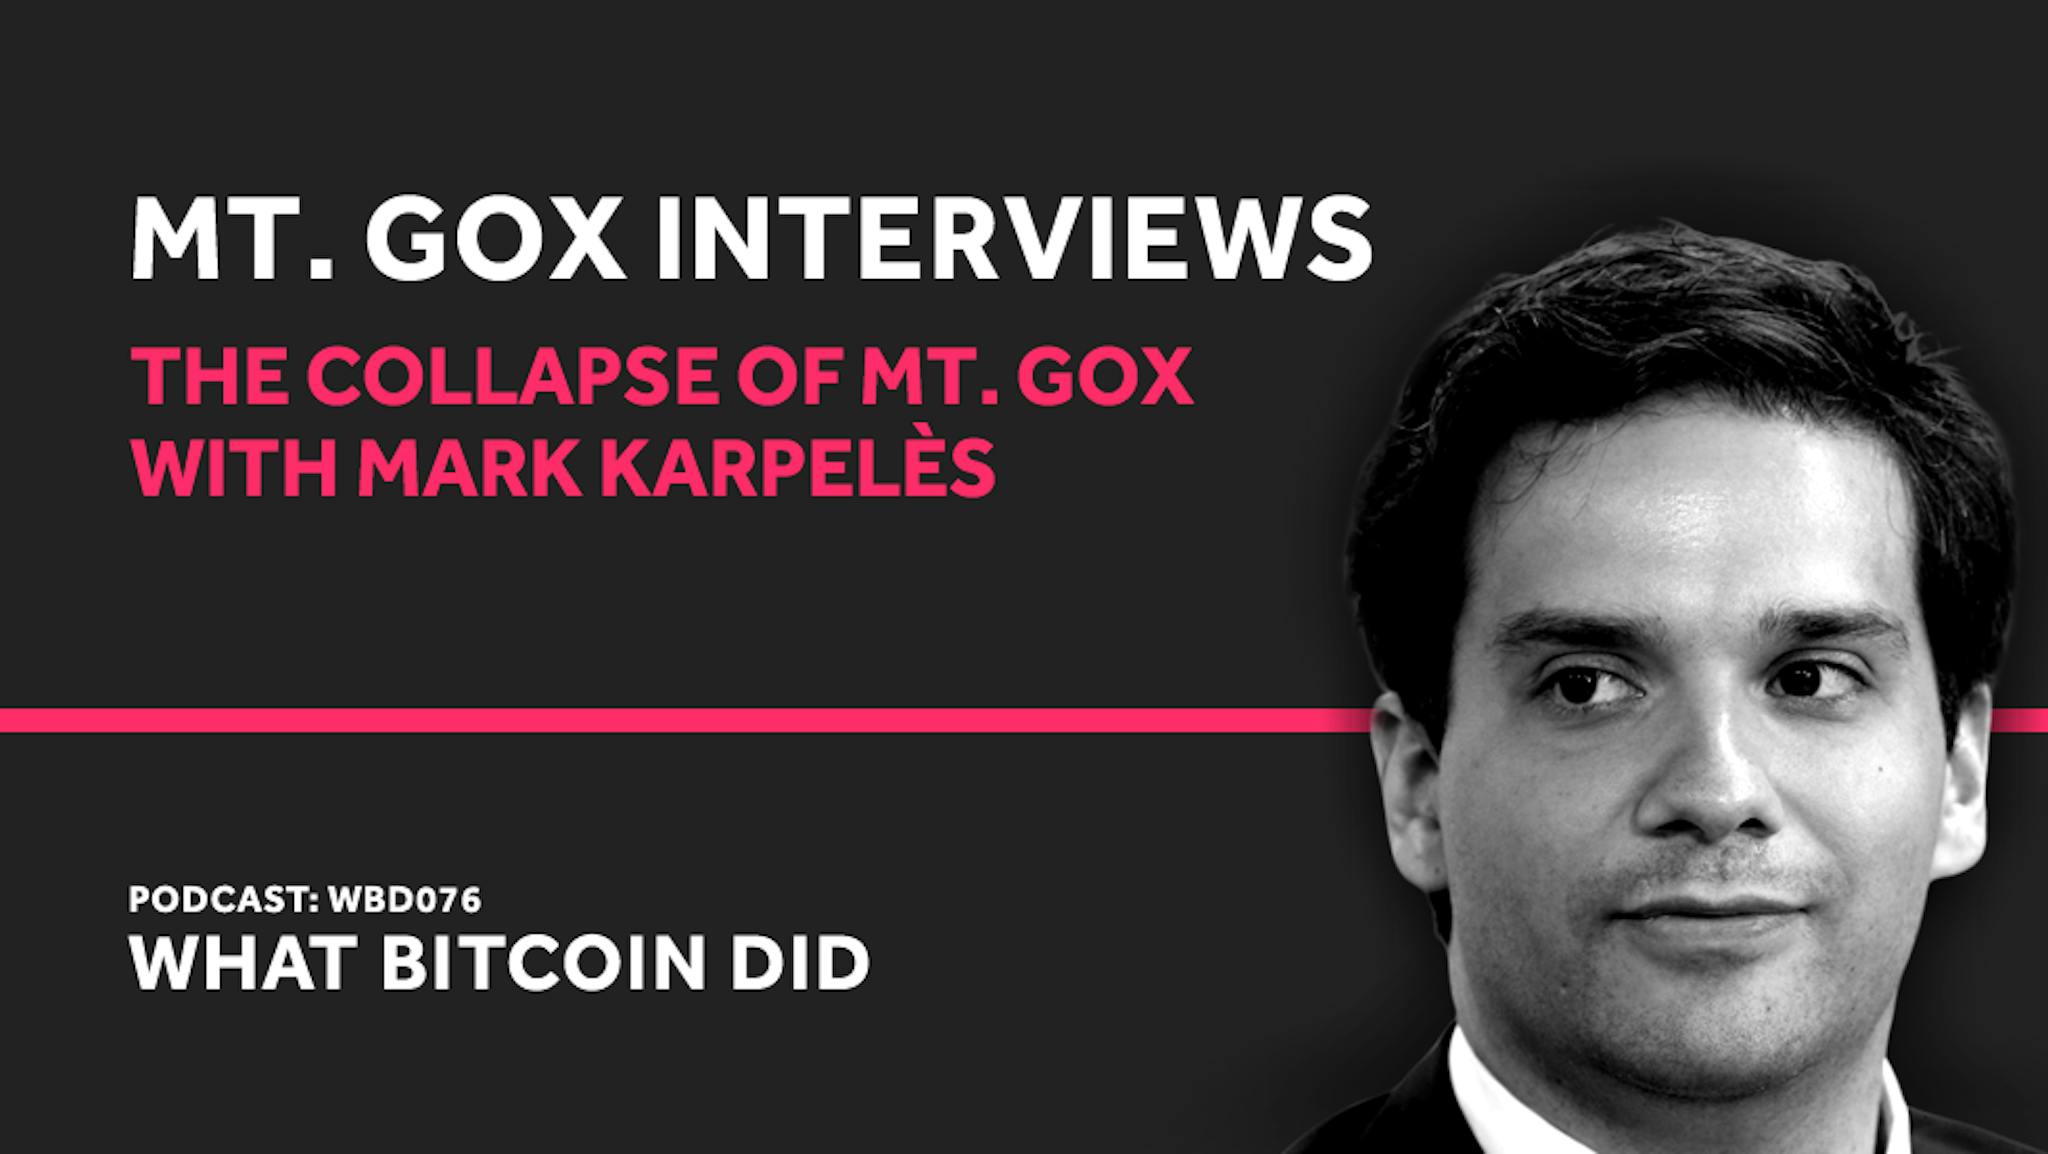 featured image - Mark Karpelès on the Collapse of Mt. Gox